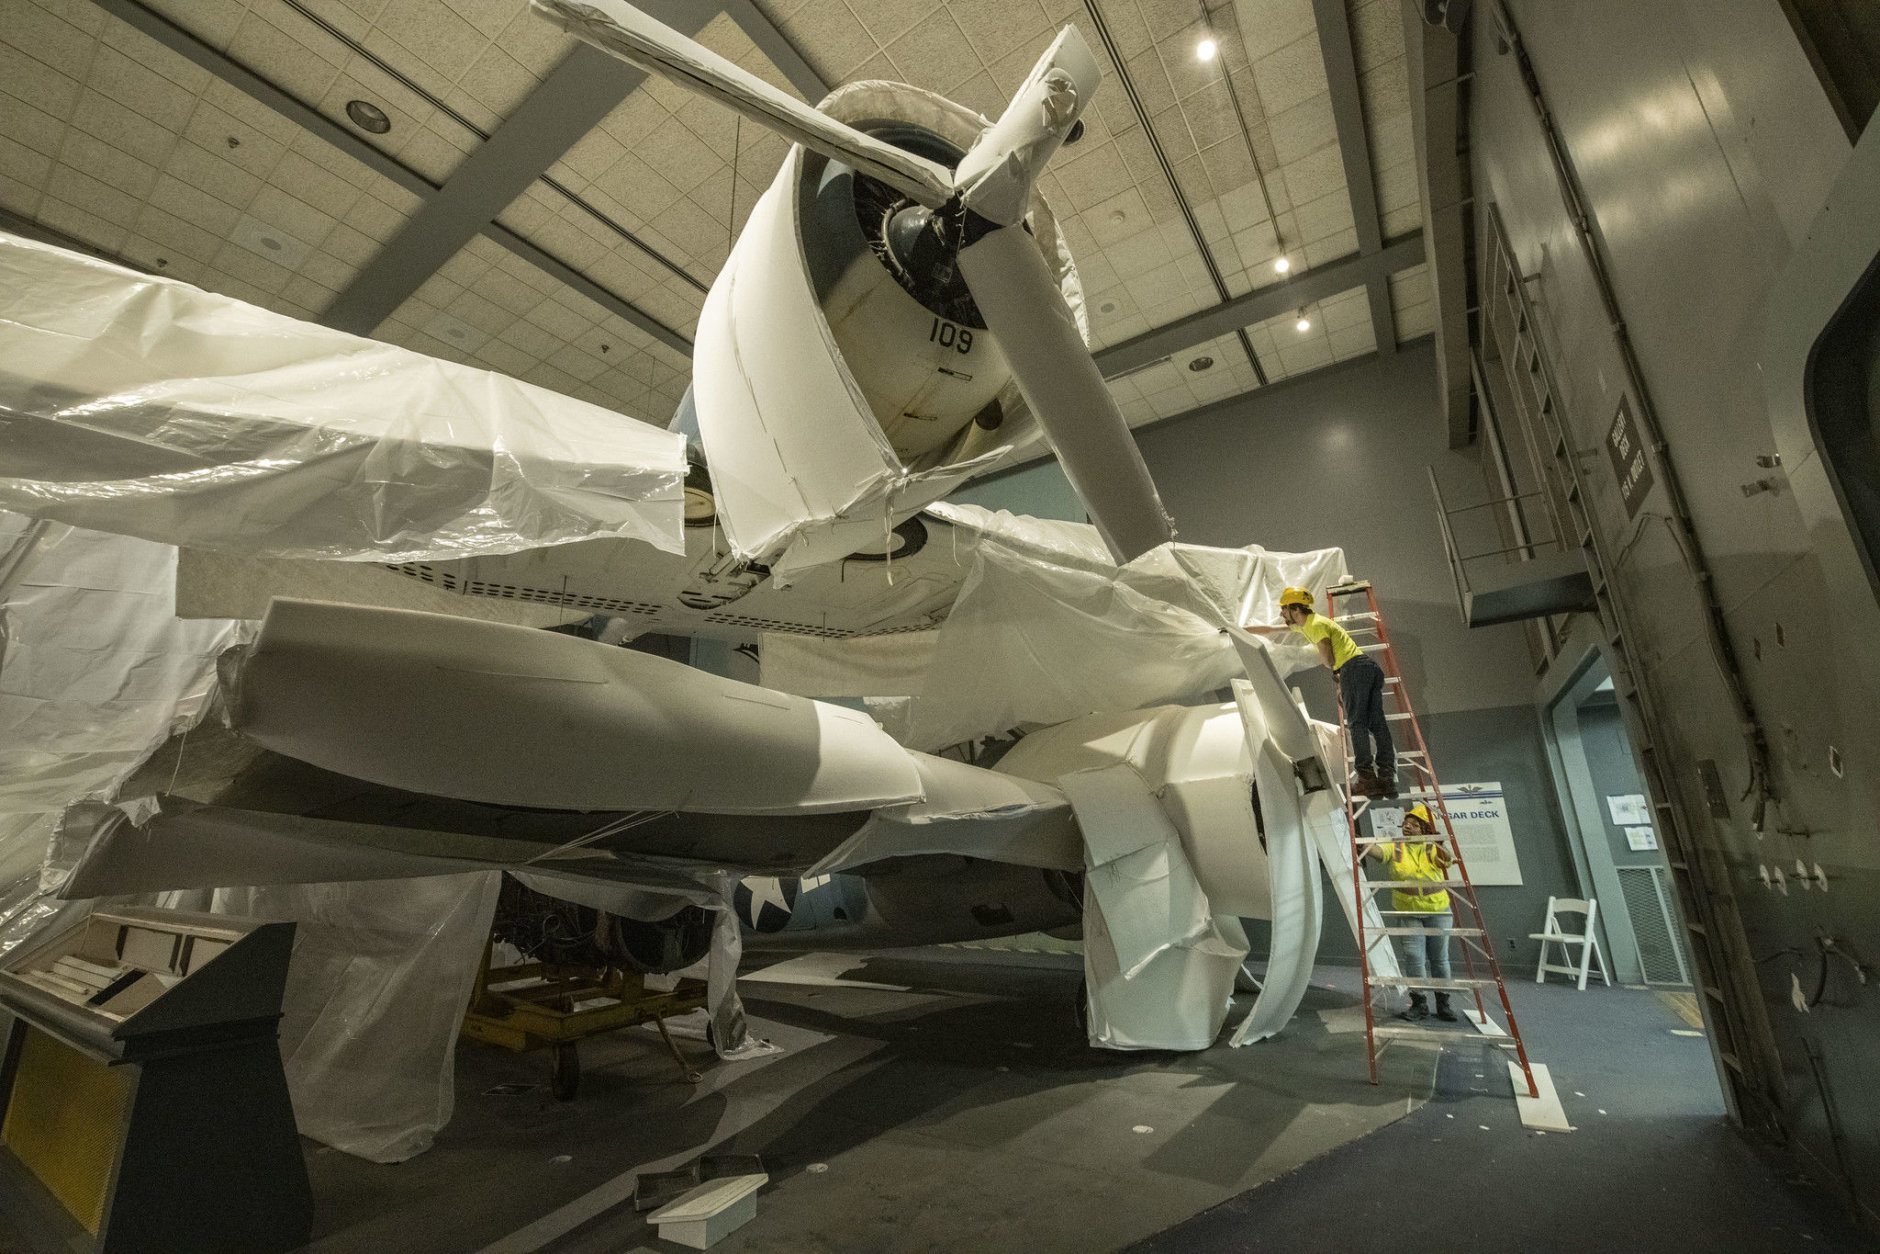 Contractors from Crozier Fine Arts work to protect in place the Hellcat aircraft in the closed Sea-Air Operations gallery as part of the renovation underway at the National Air and Space Museum in Washington, DC, February 19, 2019. (Smithsonian photo by Jim Preston)  Material is subject to Smithsonian Terms of Use. Should you wish to use National Air and Space material in any medium, please submit an Application for Permission to Reproduce NASM Material, available at:  https://airandspace.si.edu/permissions